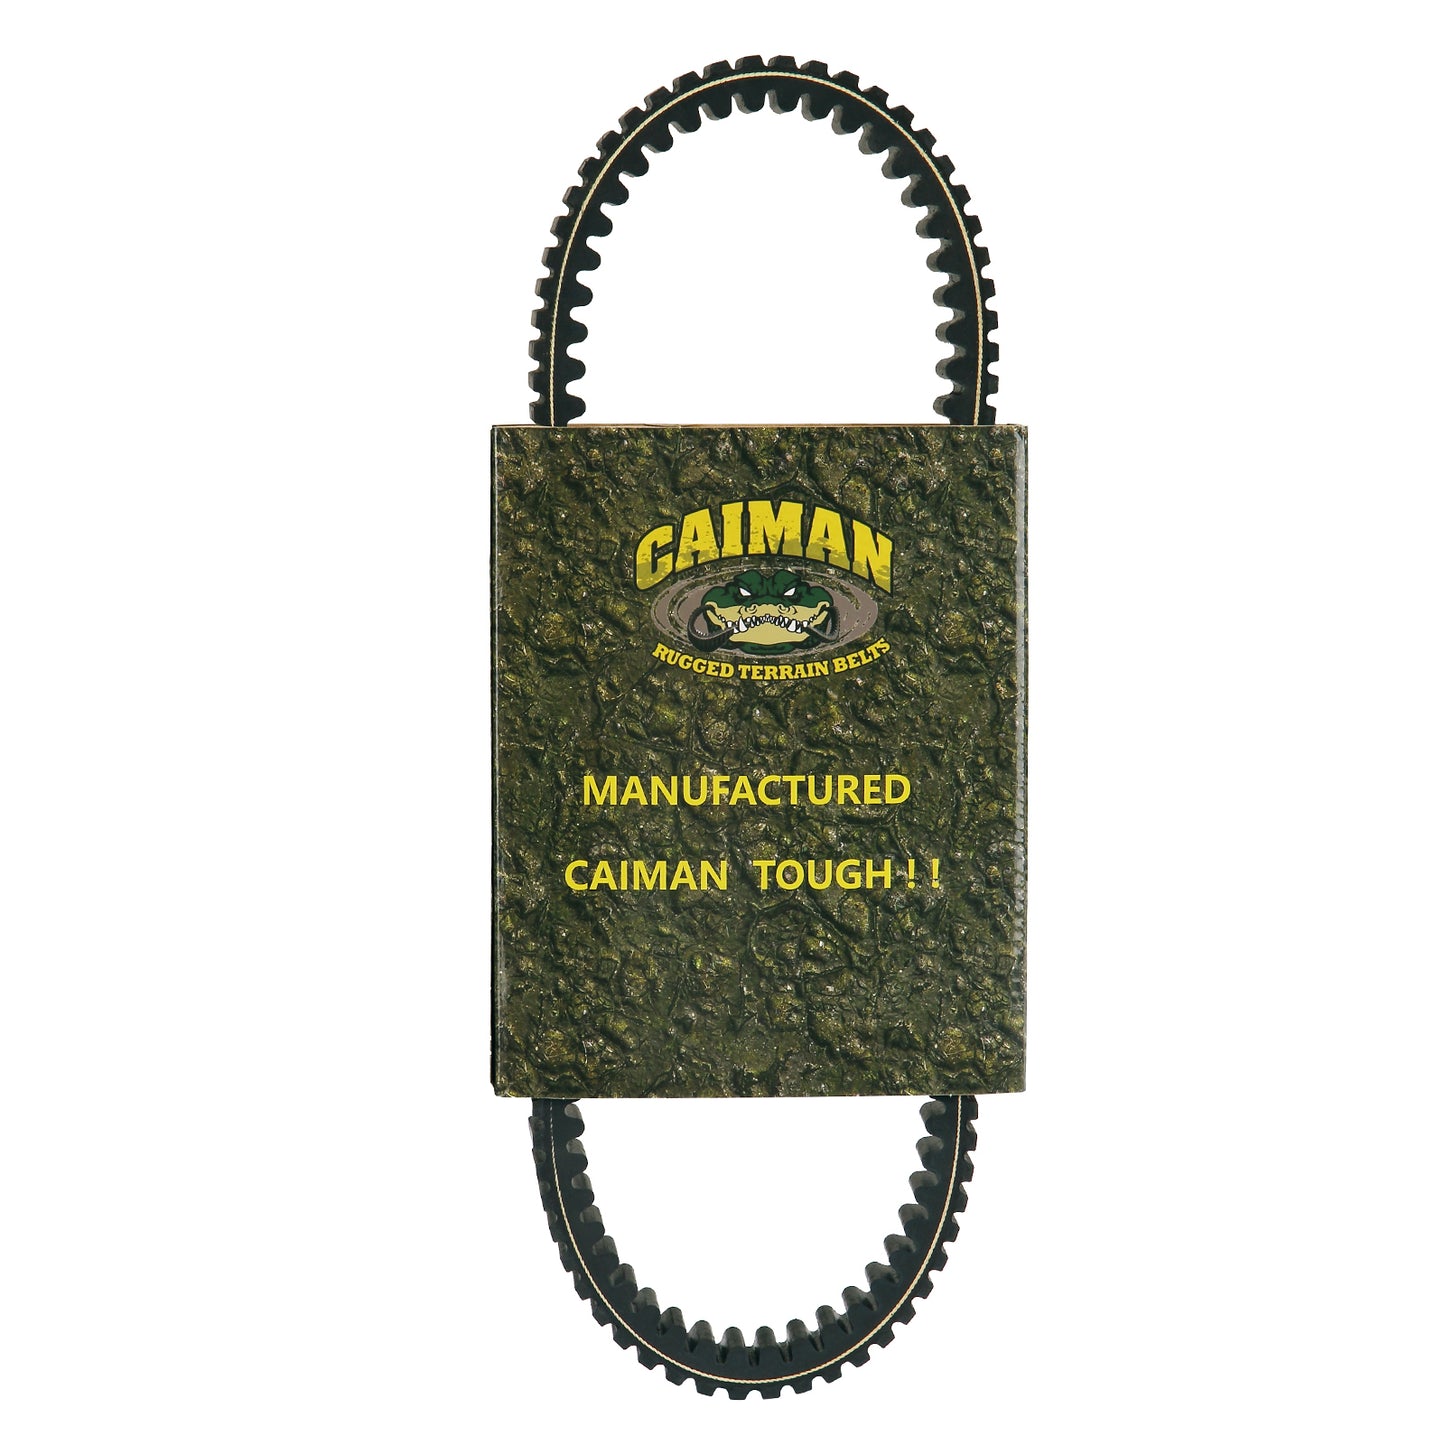 Automatic Continuously Variable Transmission (CVT) Belt Caiman Rugged Terrain CAM-23VS3856